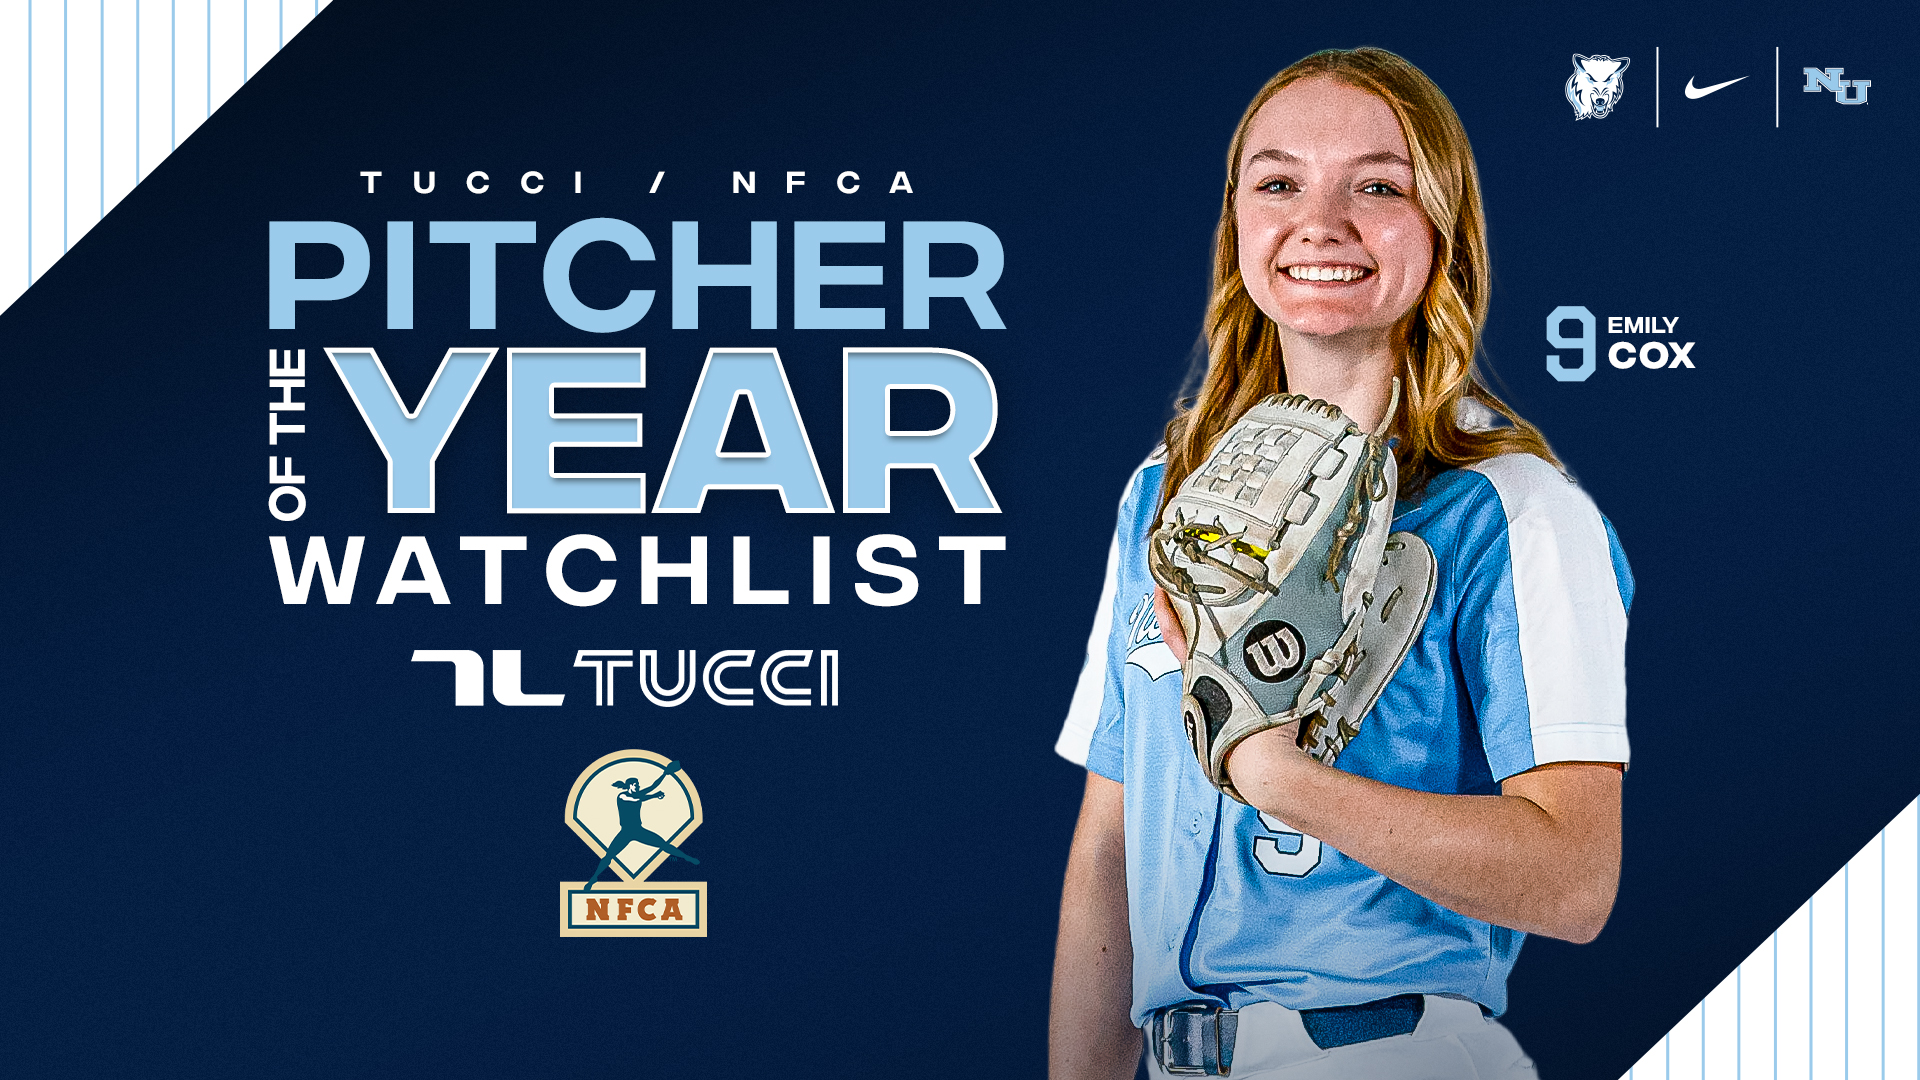 Cox Named To The 2024 Tucci/ NFCA DII Pitcher Of The Year Watchlist